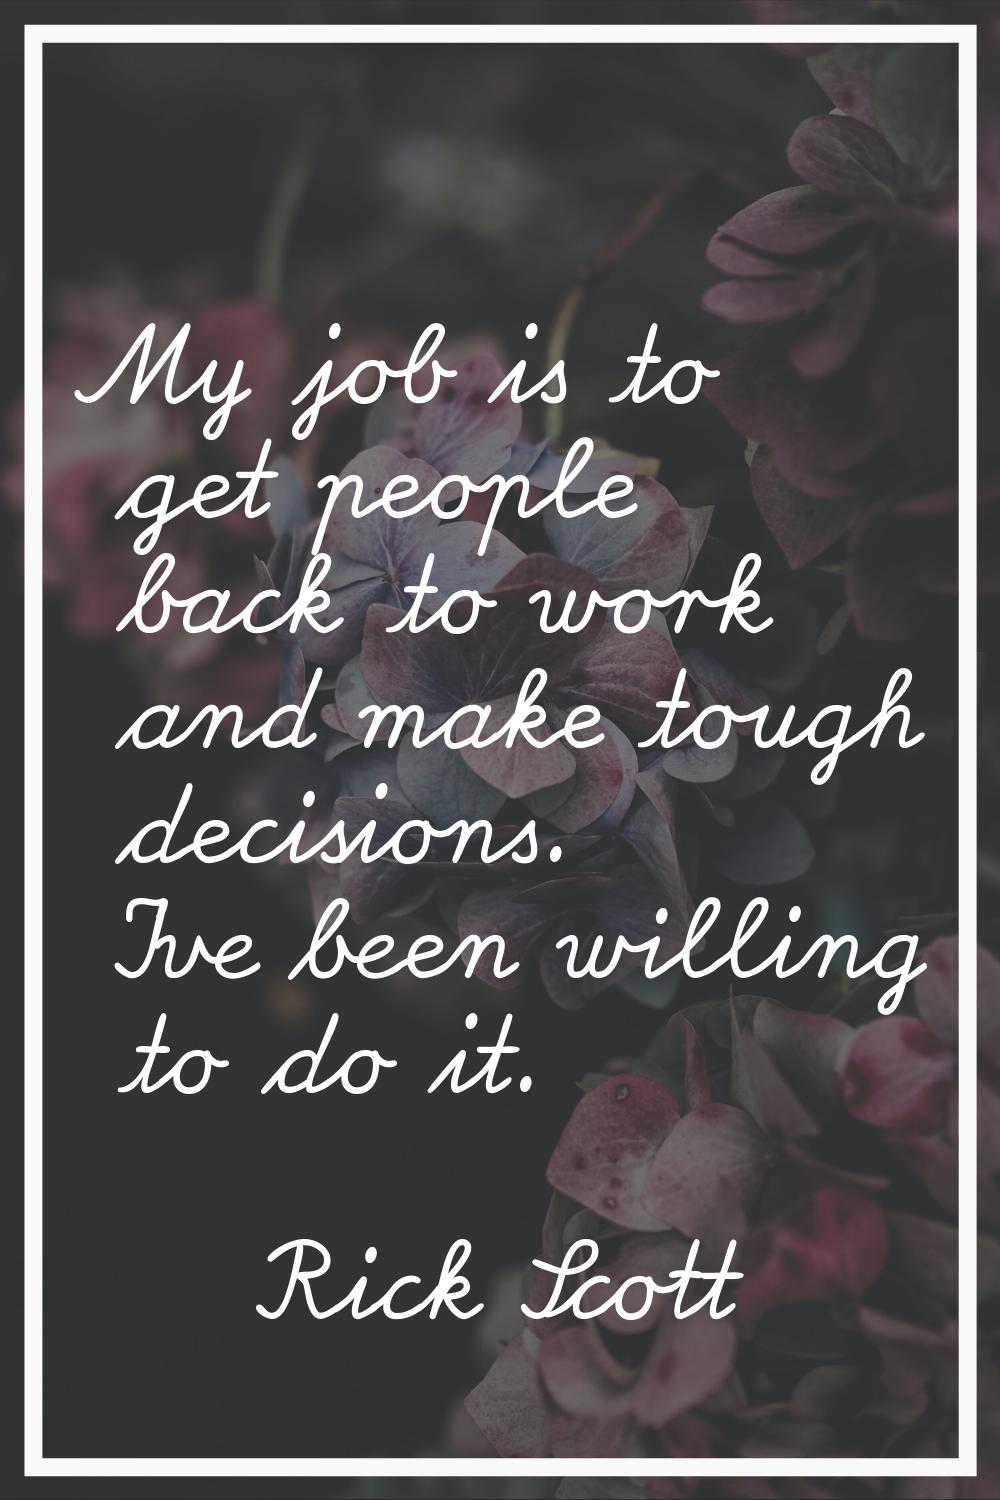 My job is to get people back to work and make tough decisions. I've been willing to do it.